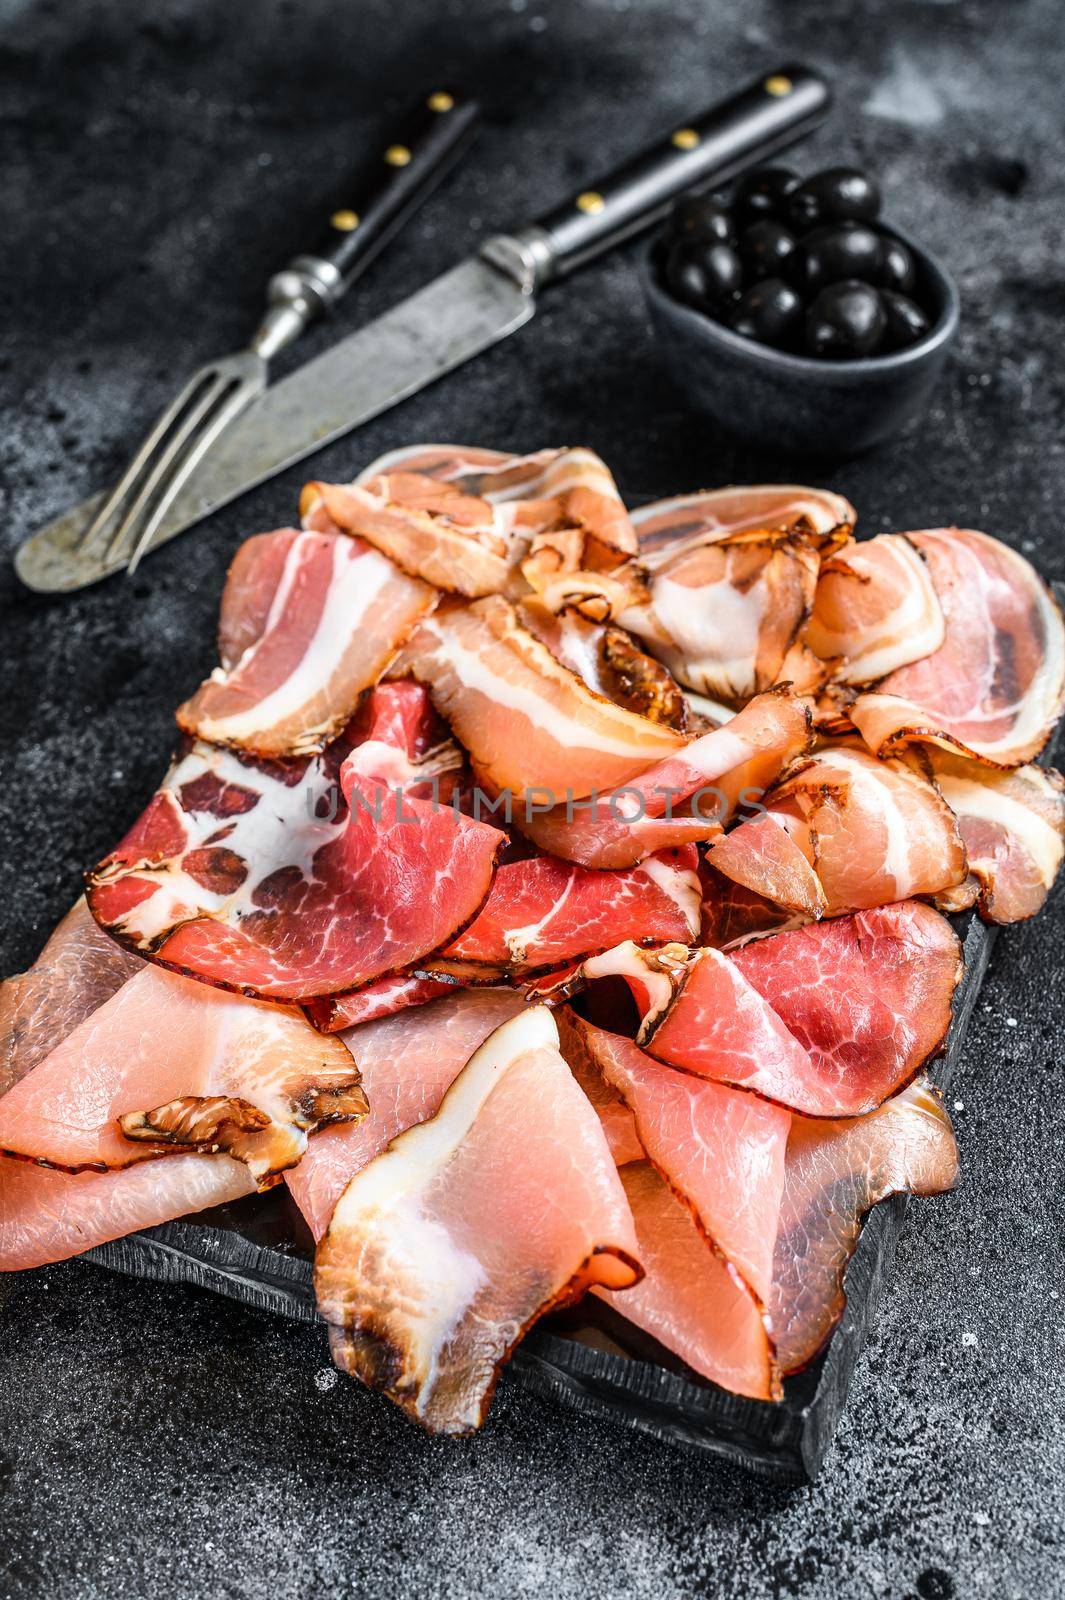 Set of cold cured italian meat Ham, prosciutto, pancetta, bacon. Black background. Top view by Composter